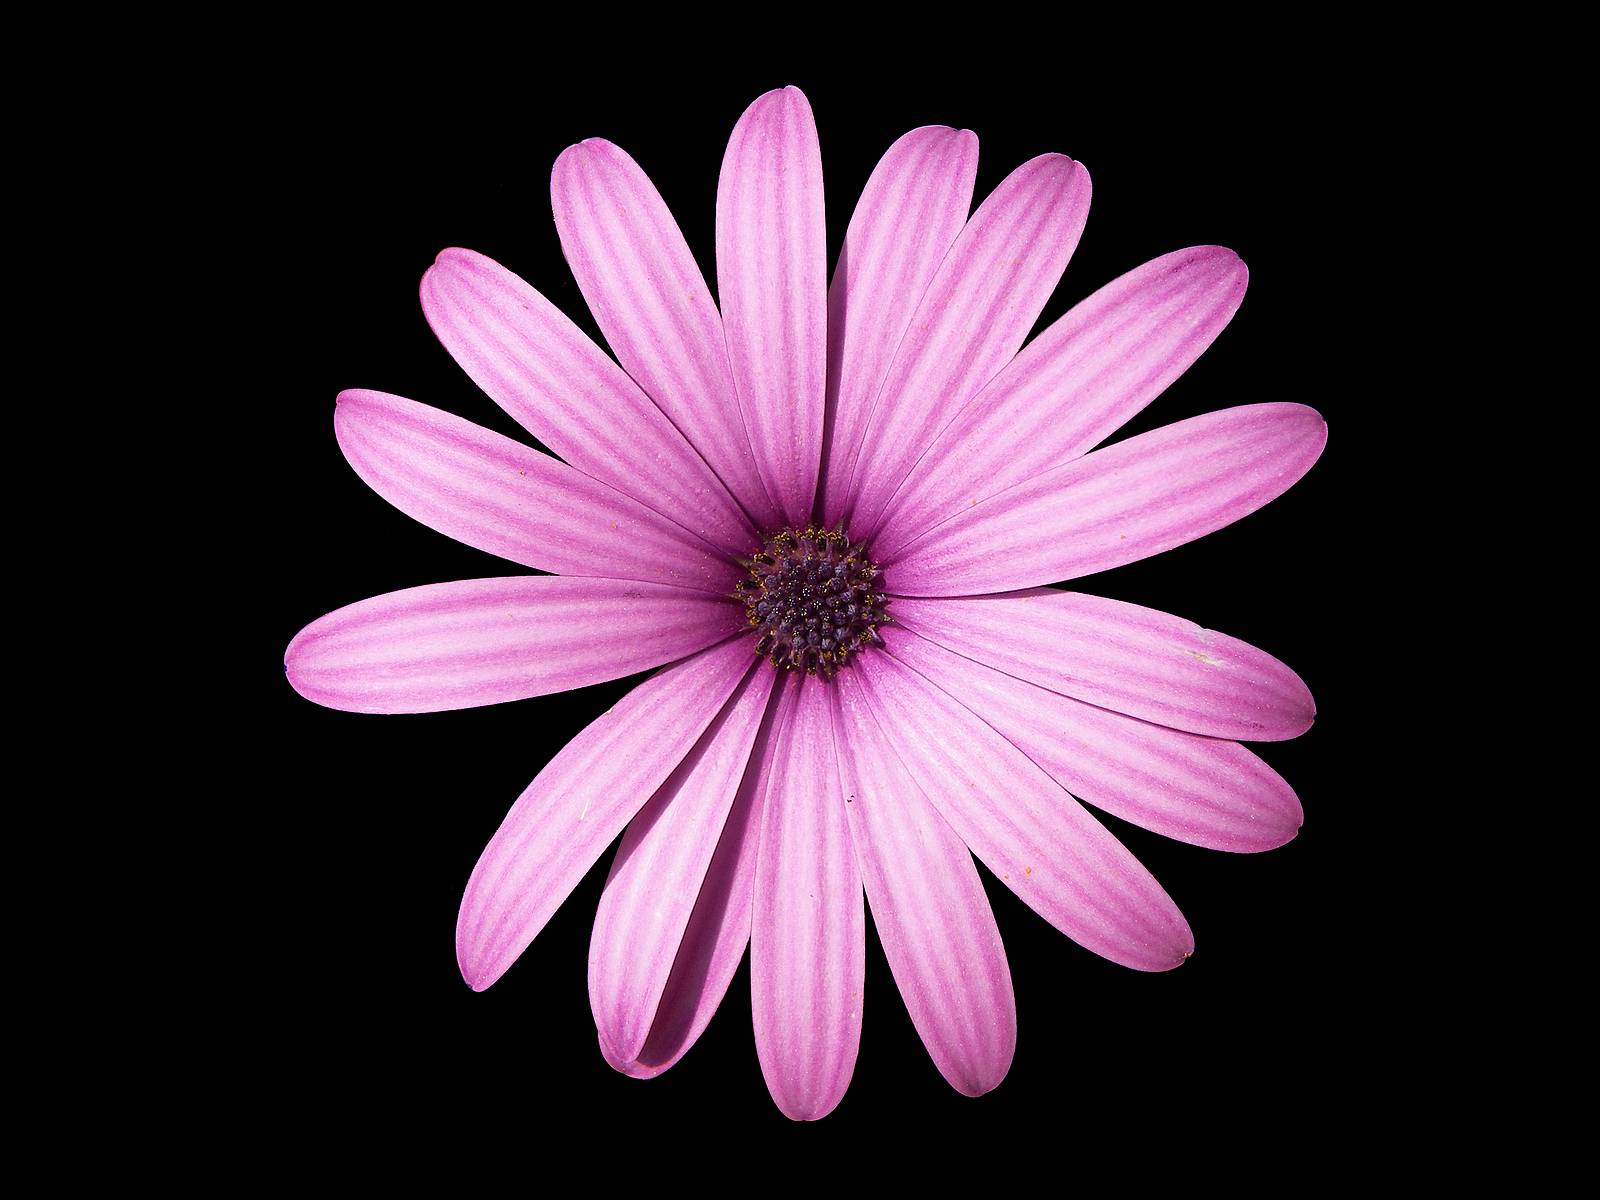 Pink petaled flower wallpaper photo  Free Android backgrounds Image on  Unsplash